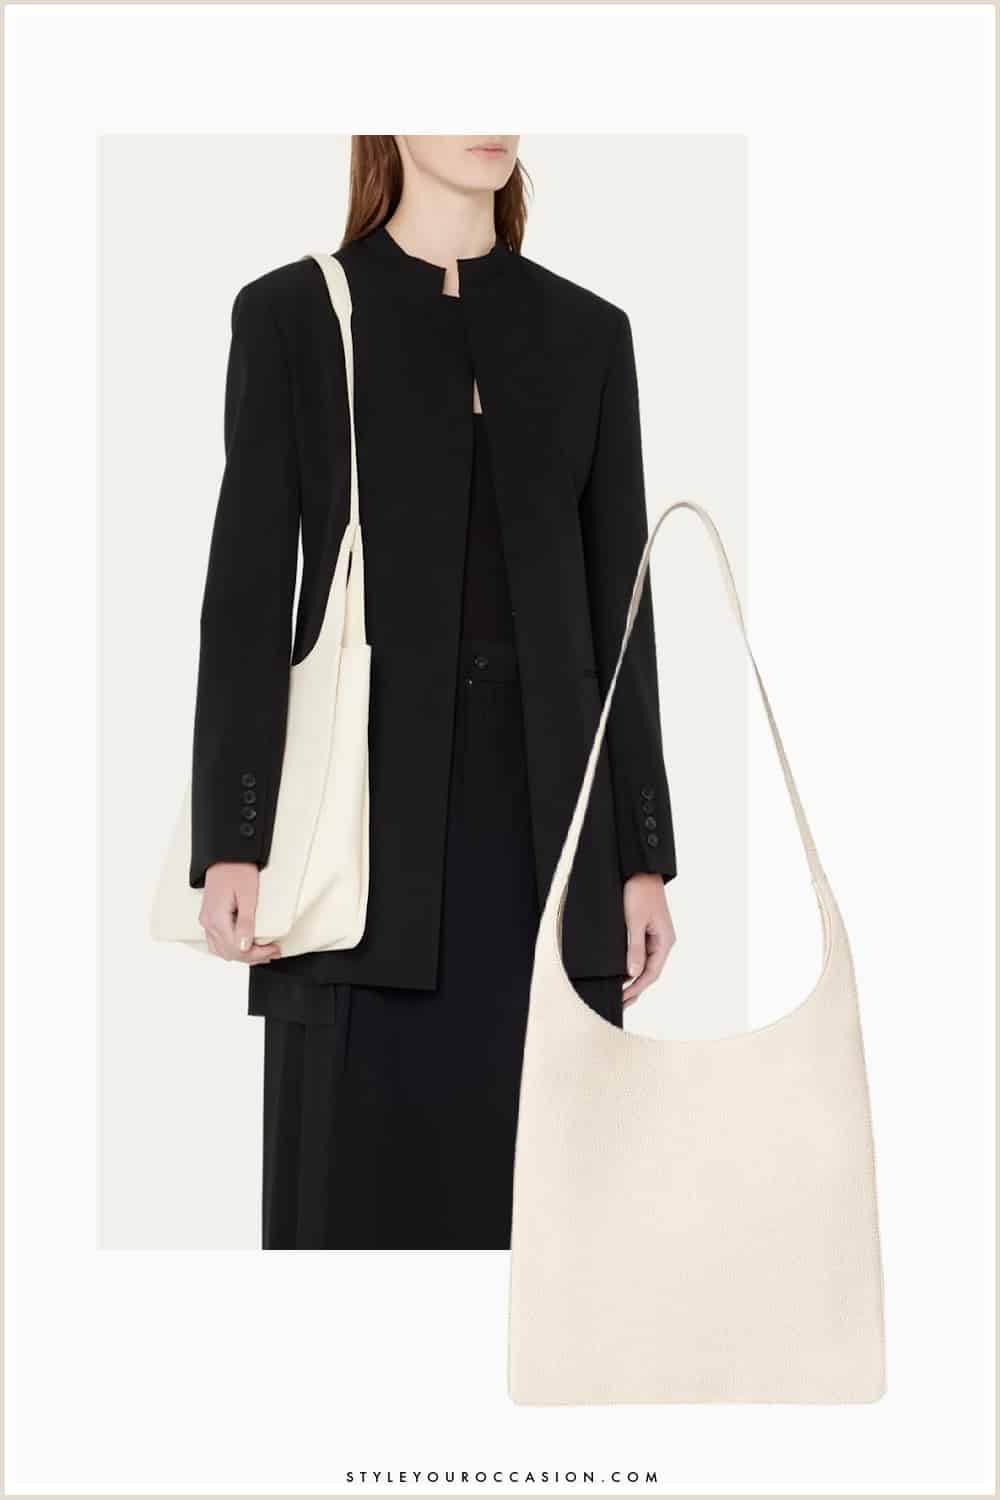 image of a woman wearing an all black outfit with an ivory leather shoulder bag from The Row